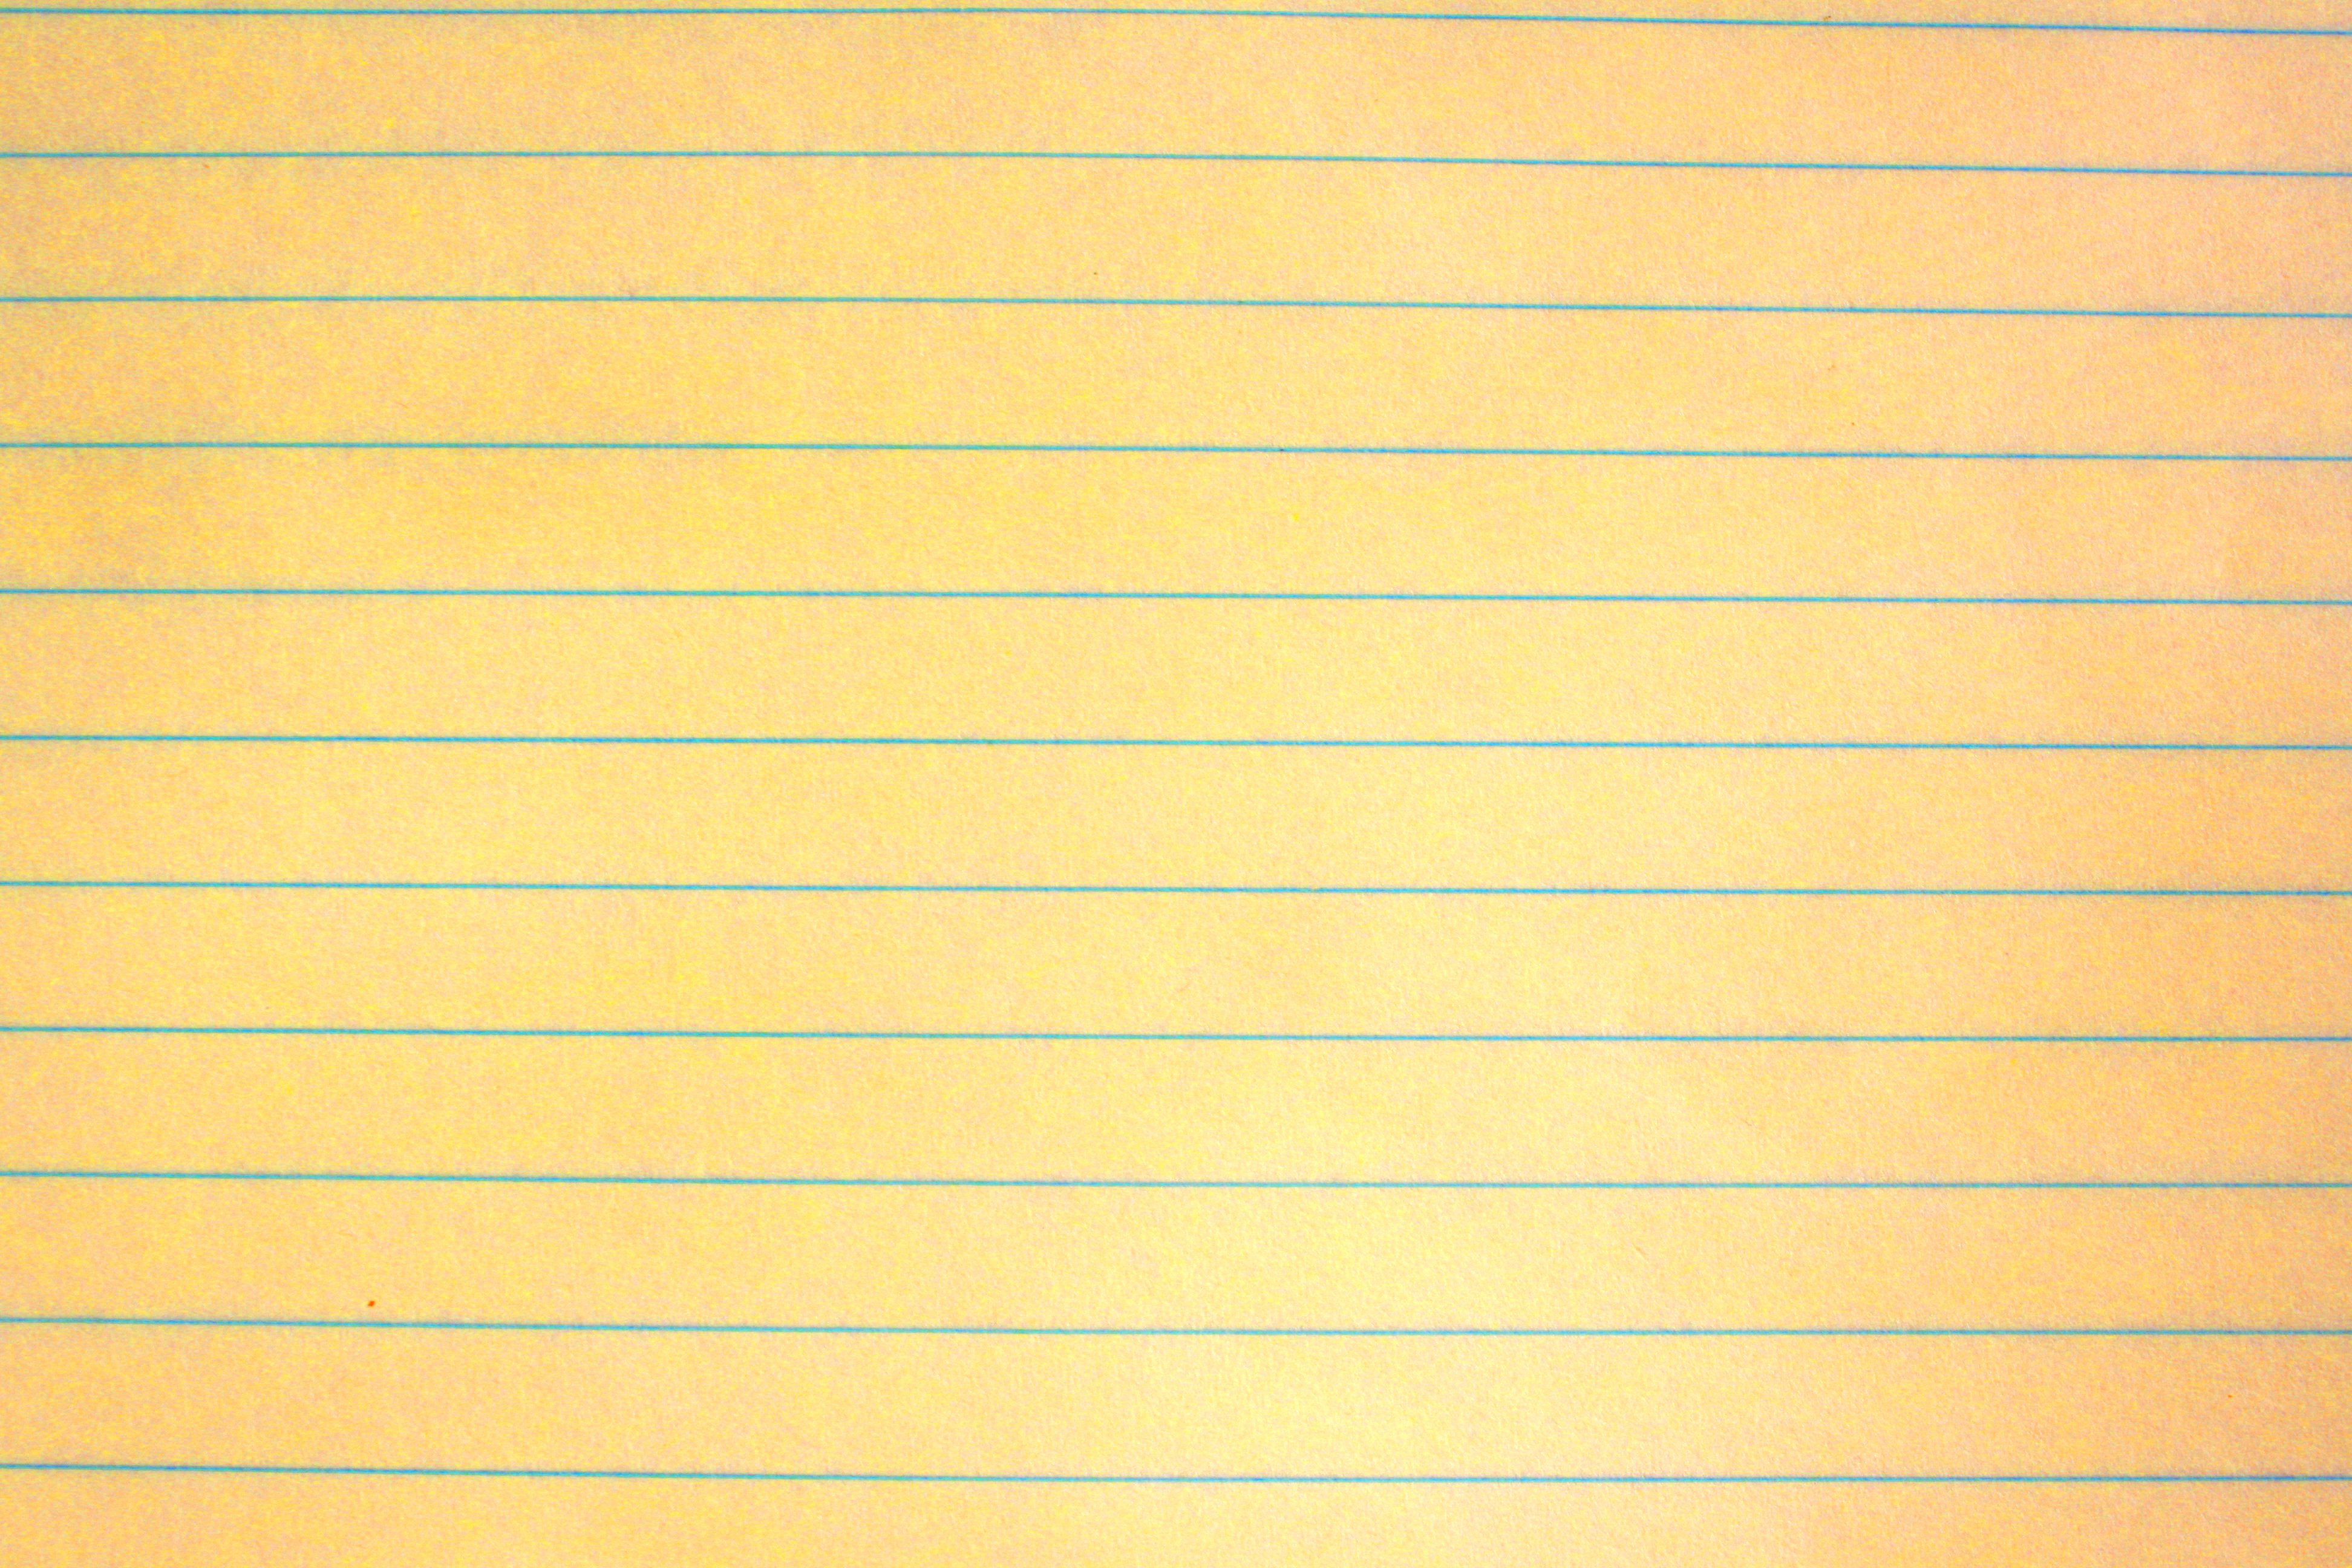 yellow paper background